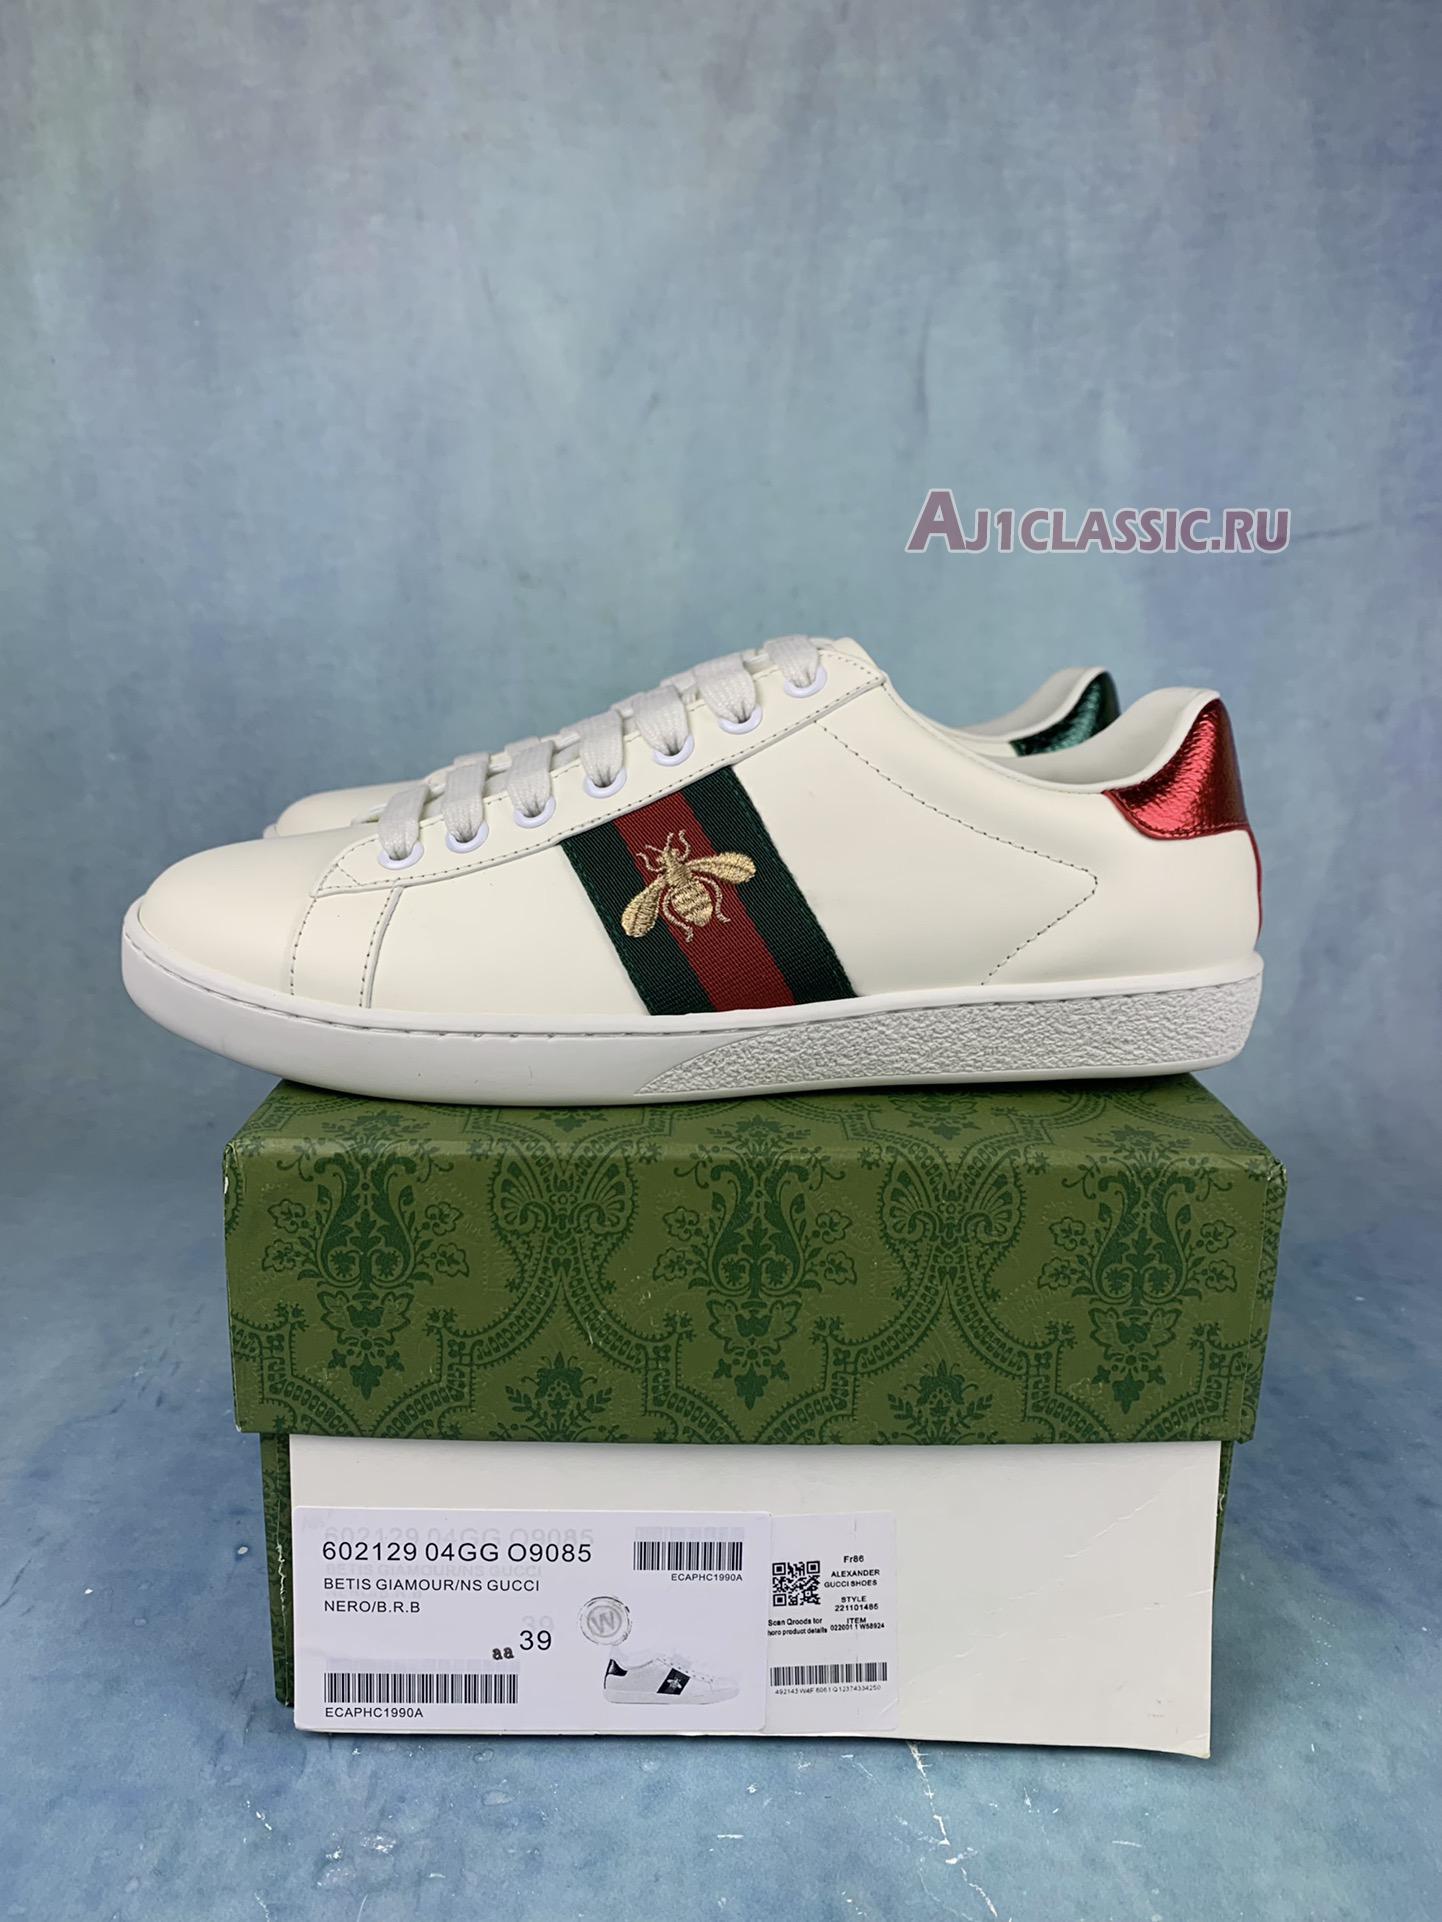 Gucci Ace Embroidered "Bee" 429446 02JP0 9064